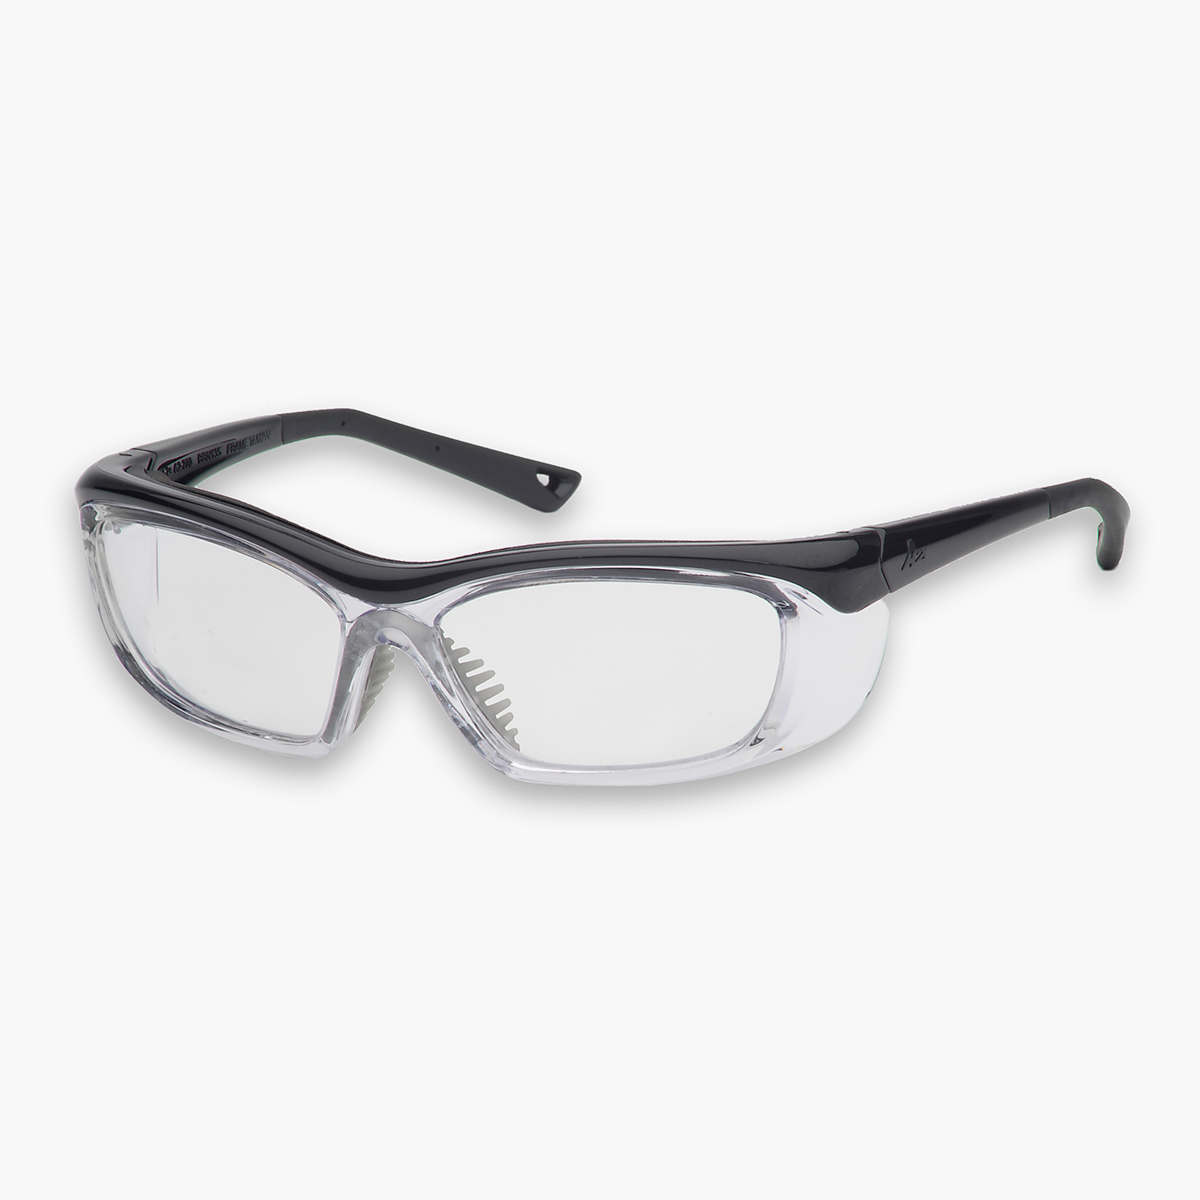 Safety Prescription Glasses That Meet Ansi Z87 1 Safety Standards Top Selling Non Conductive